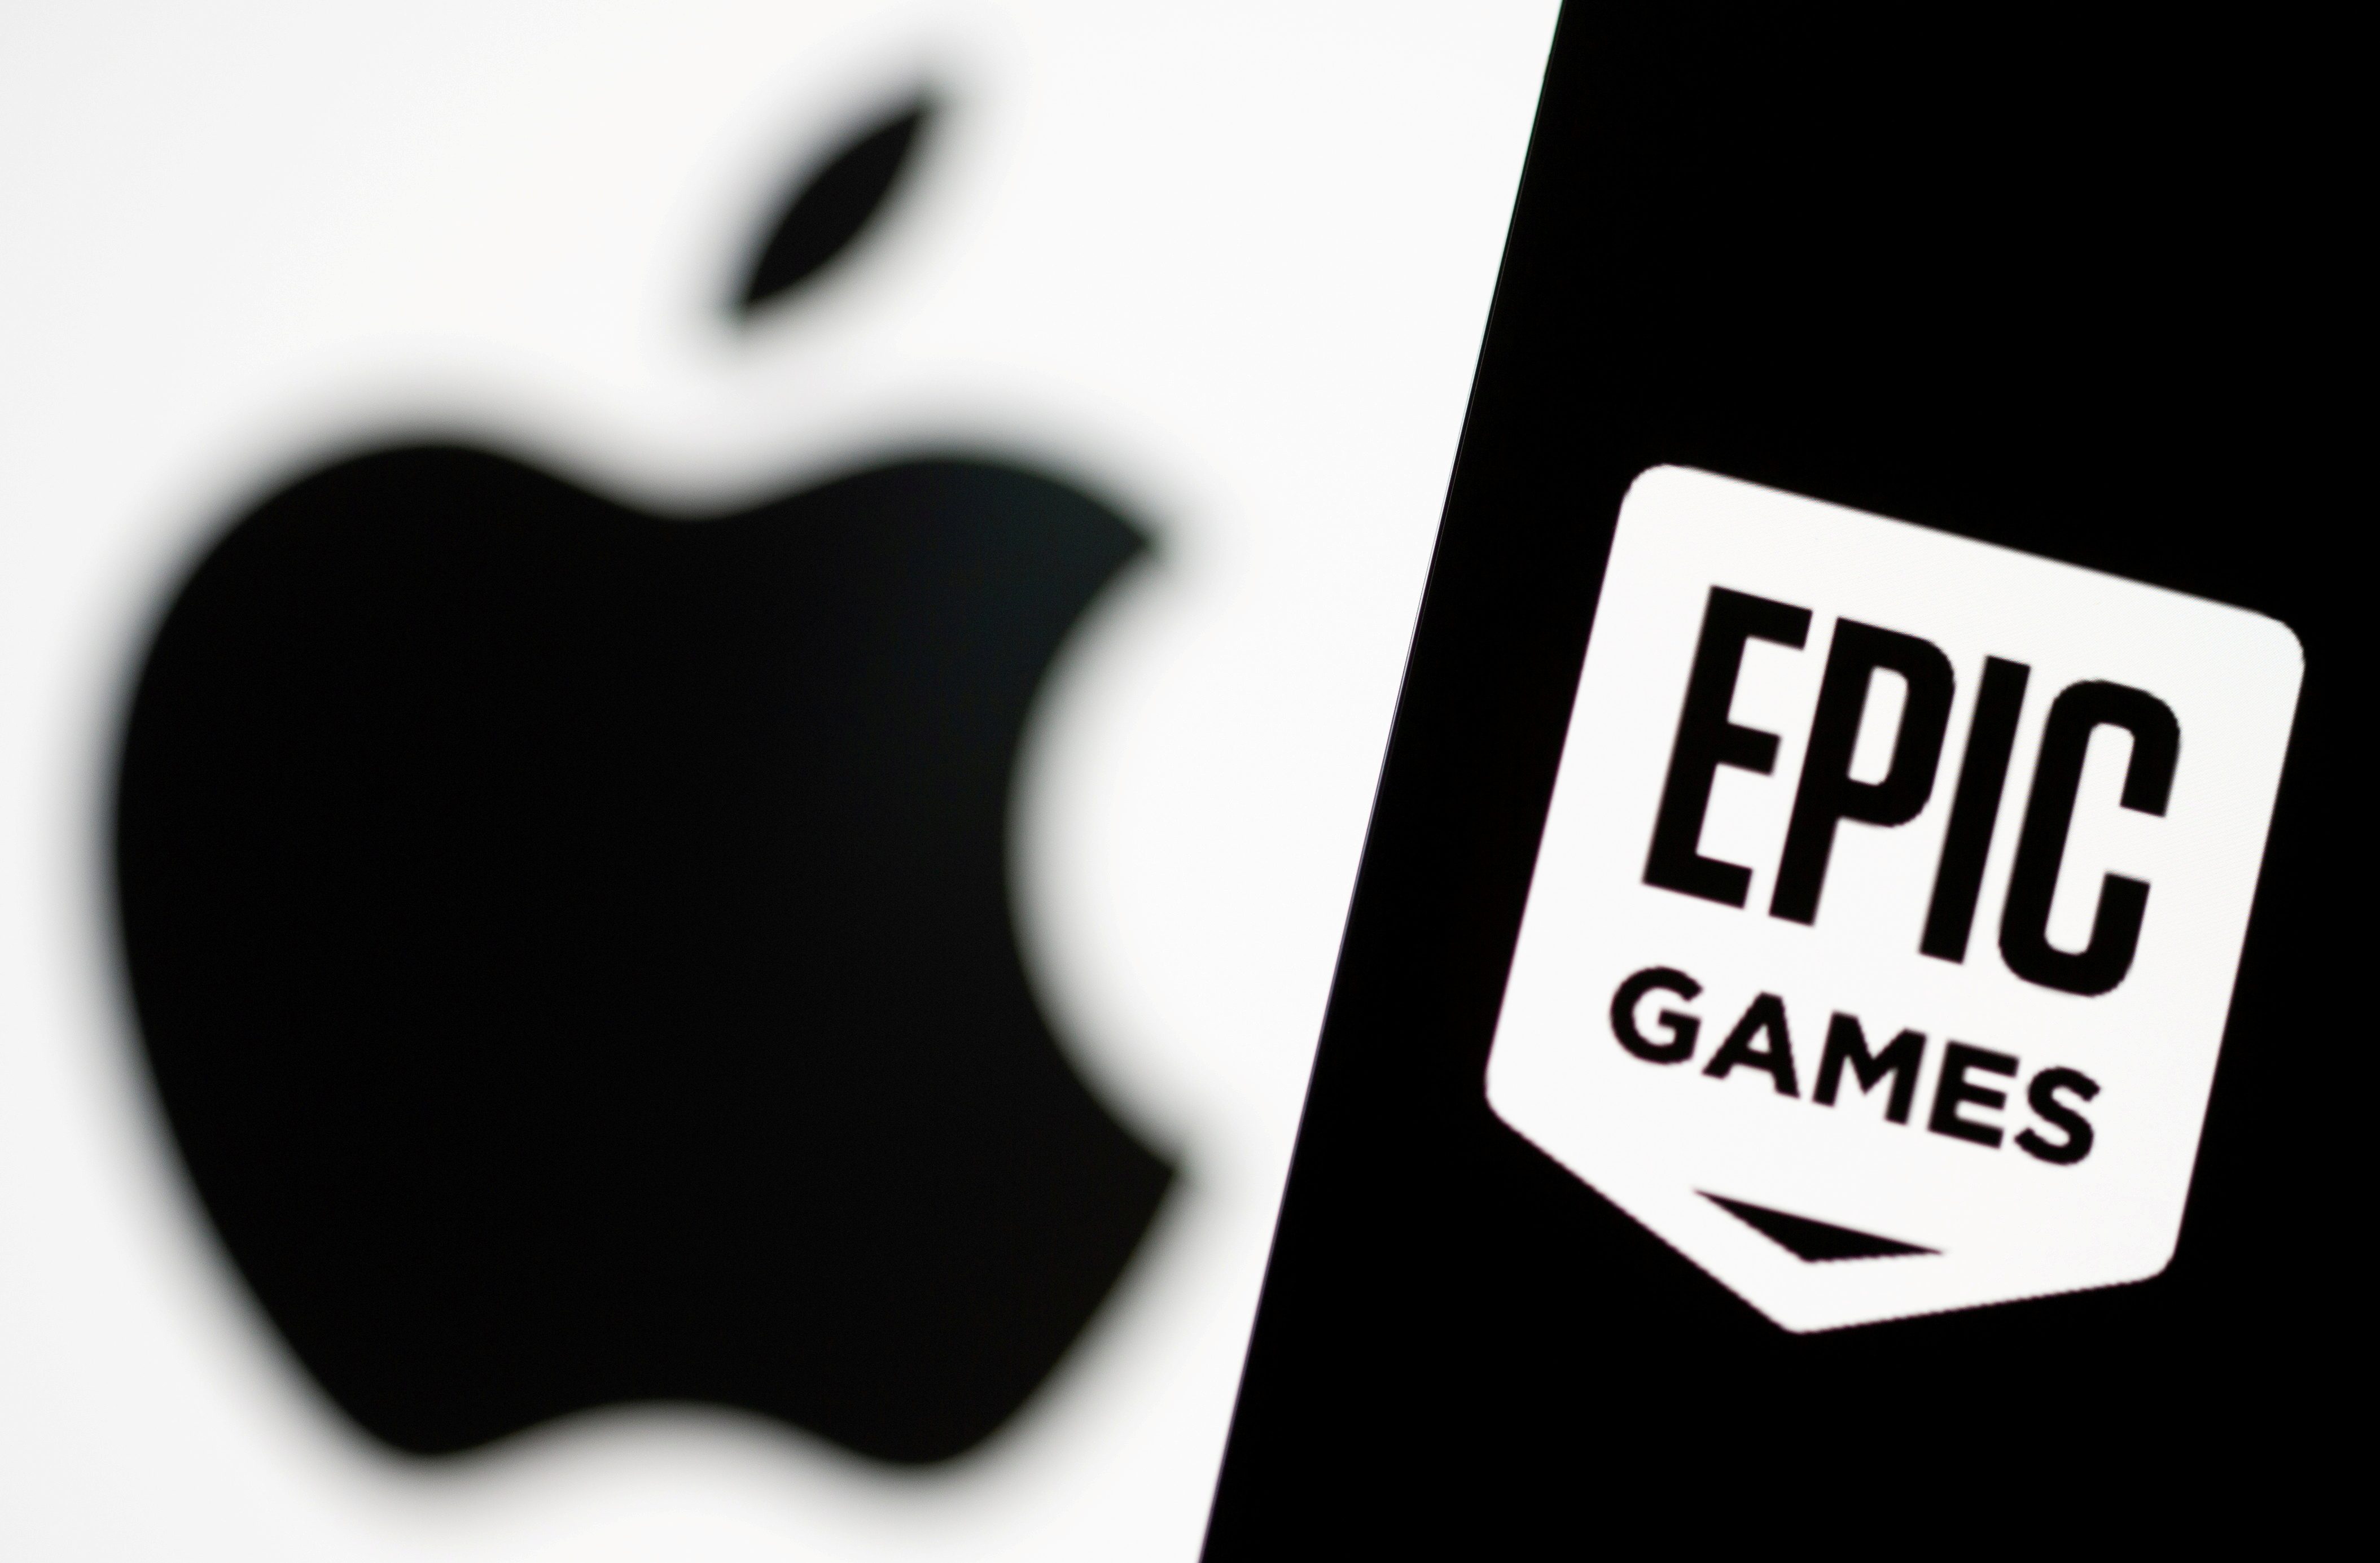 ‘Fortnite’ creator Epic Games to appeal ruling in Apple case